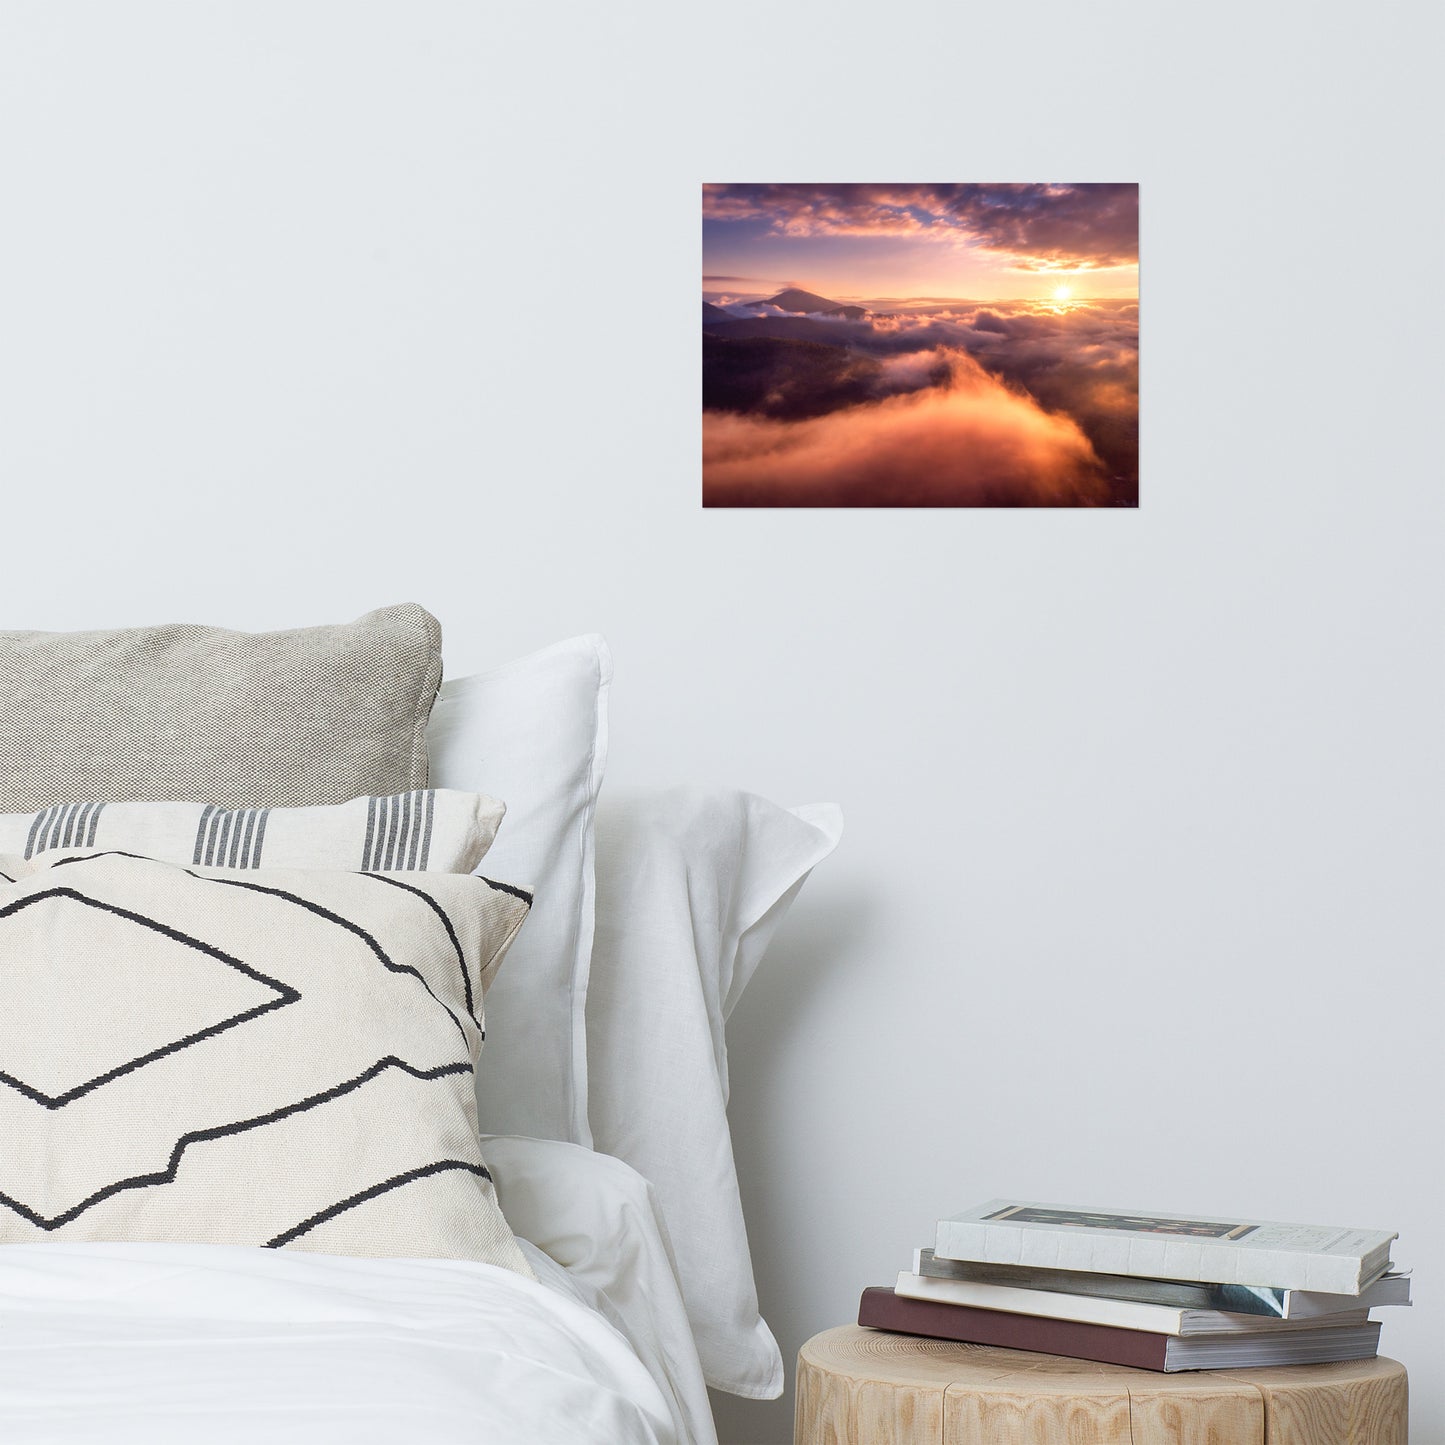 Heaven On Earth Mountains in Clouds at Sunrise Landscape Photo Loose Wall Art Prints